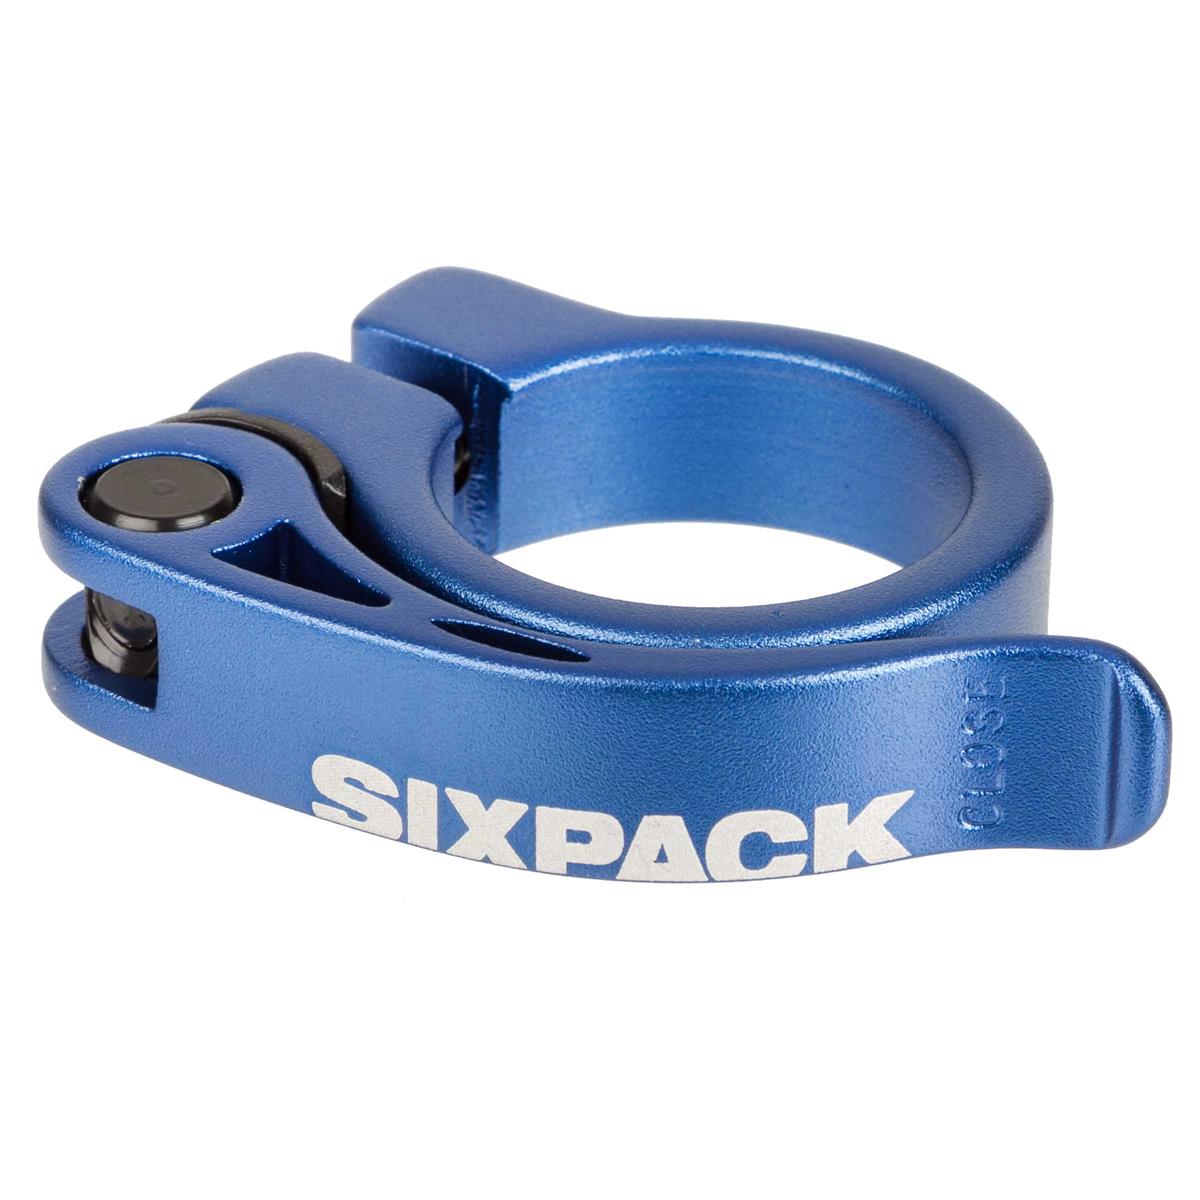 Sixpack Seat Clamp Menace Blue, Alloy, Quick-Release